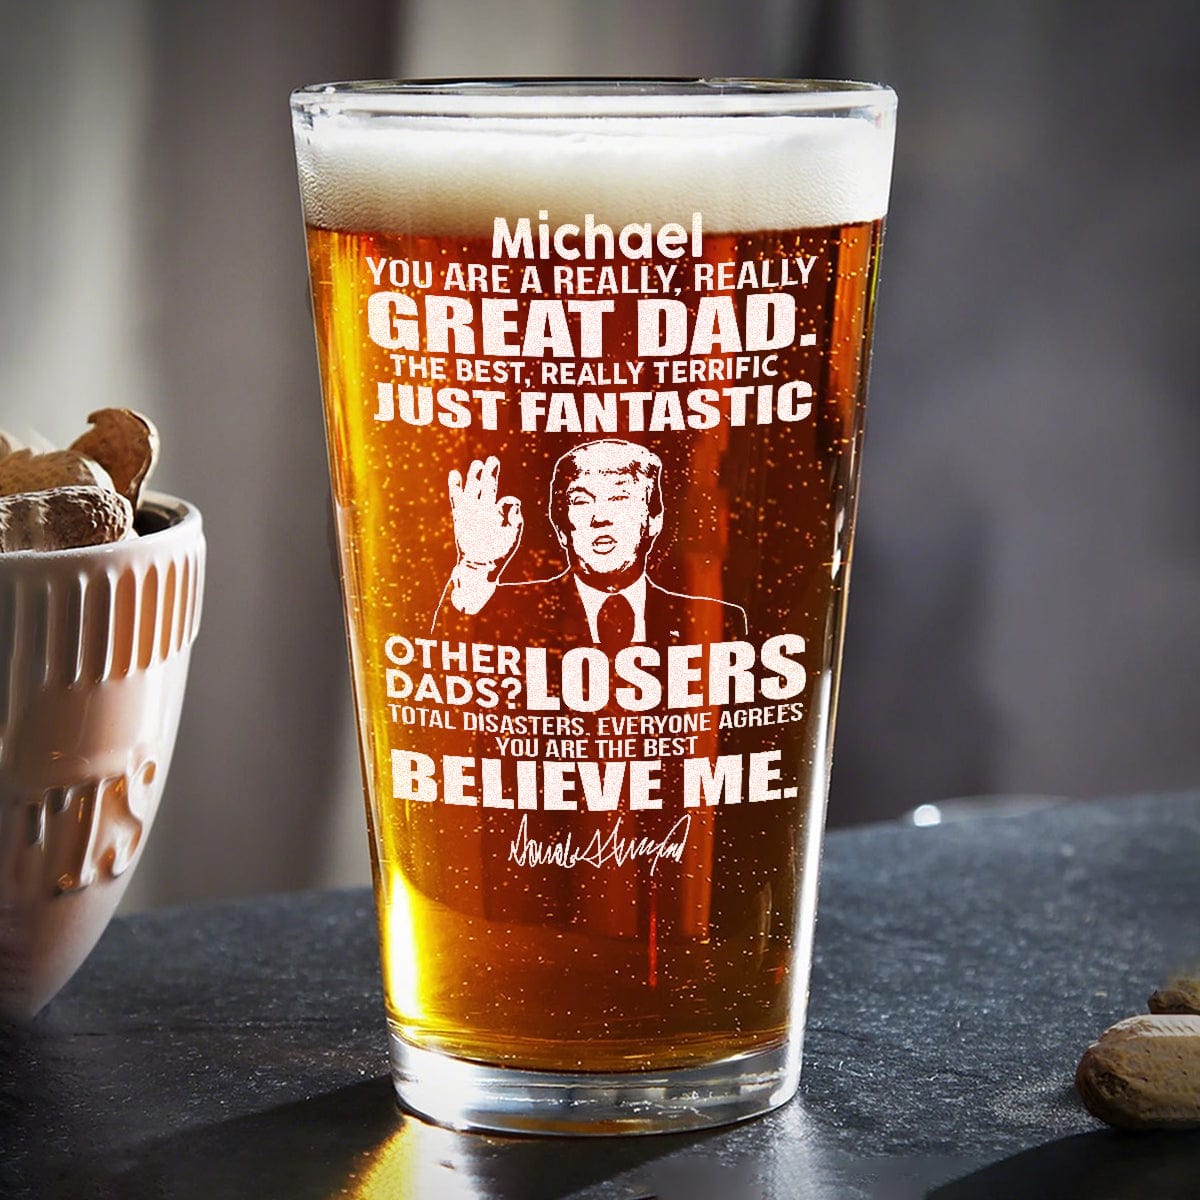 GeckoCustom Great Grandpa Great Dad Laser Engraved Beer Glass Personalized Gift TA29 890997 16oz